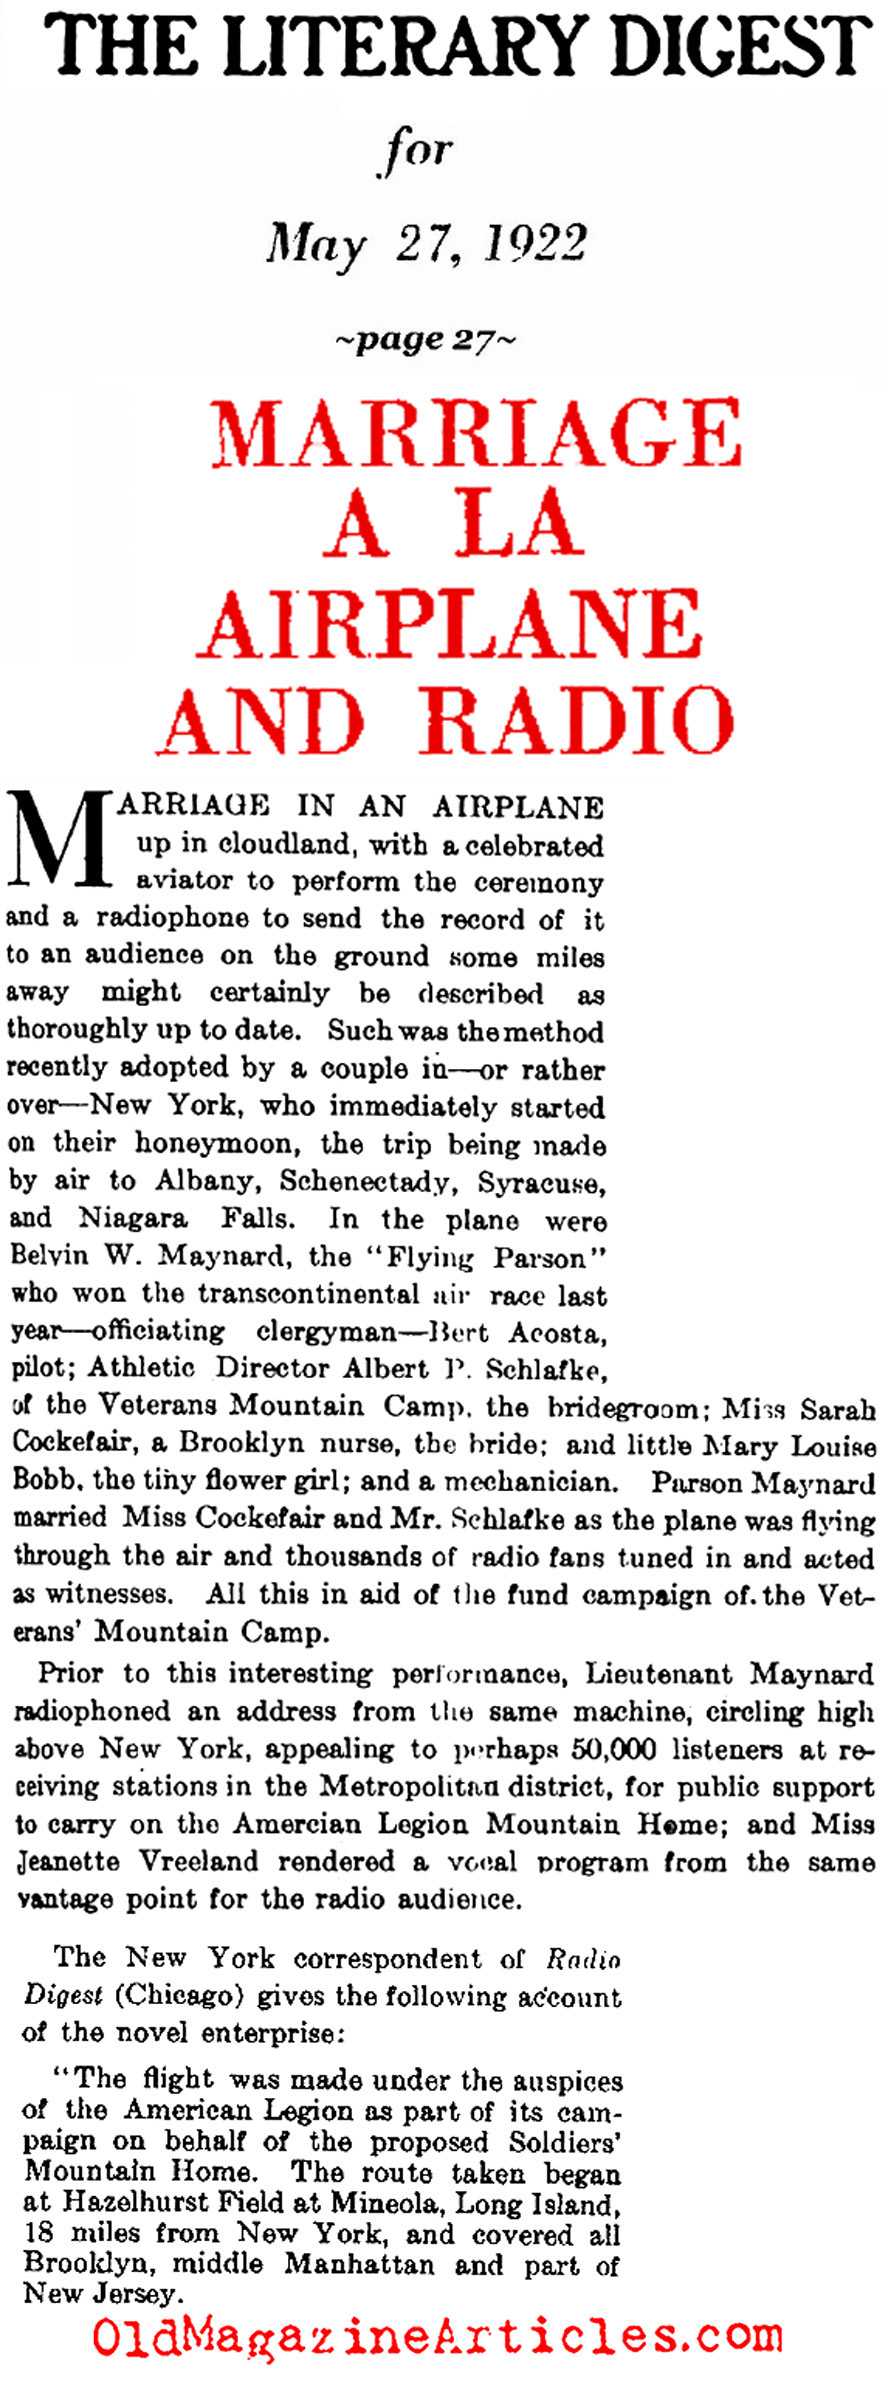 Just Another Airborne Wedding Ceremony (Literary Digest, 1922)